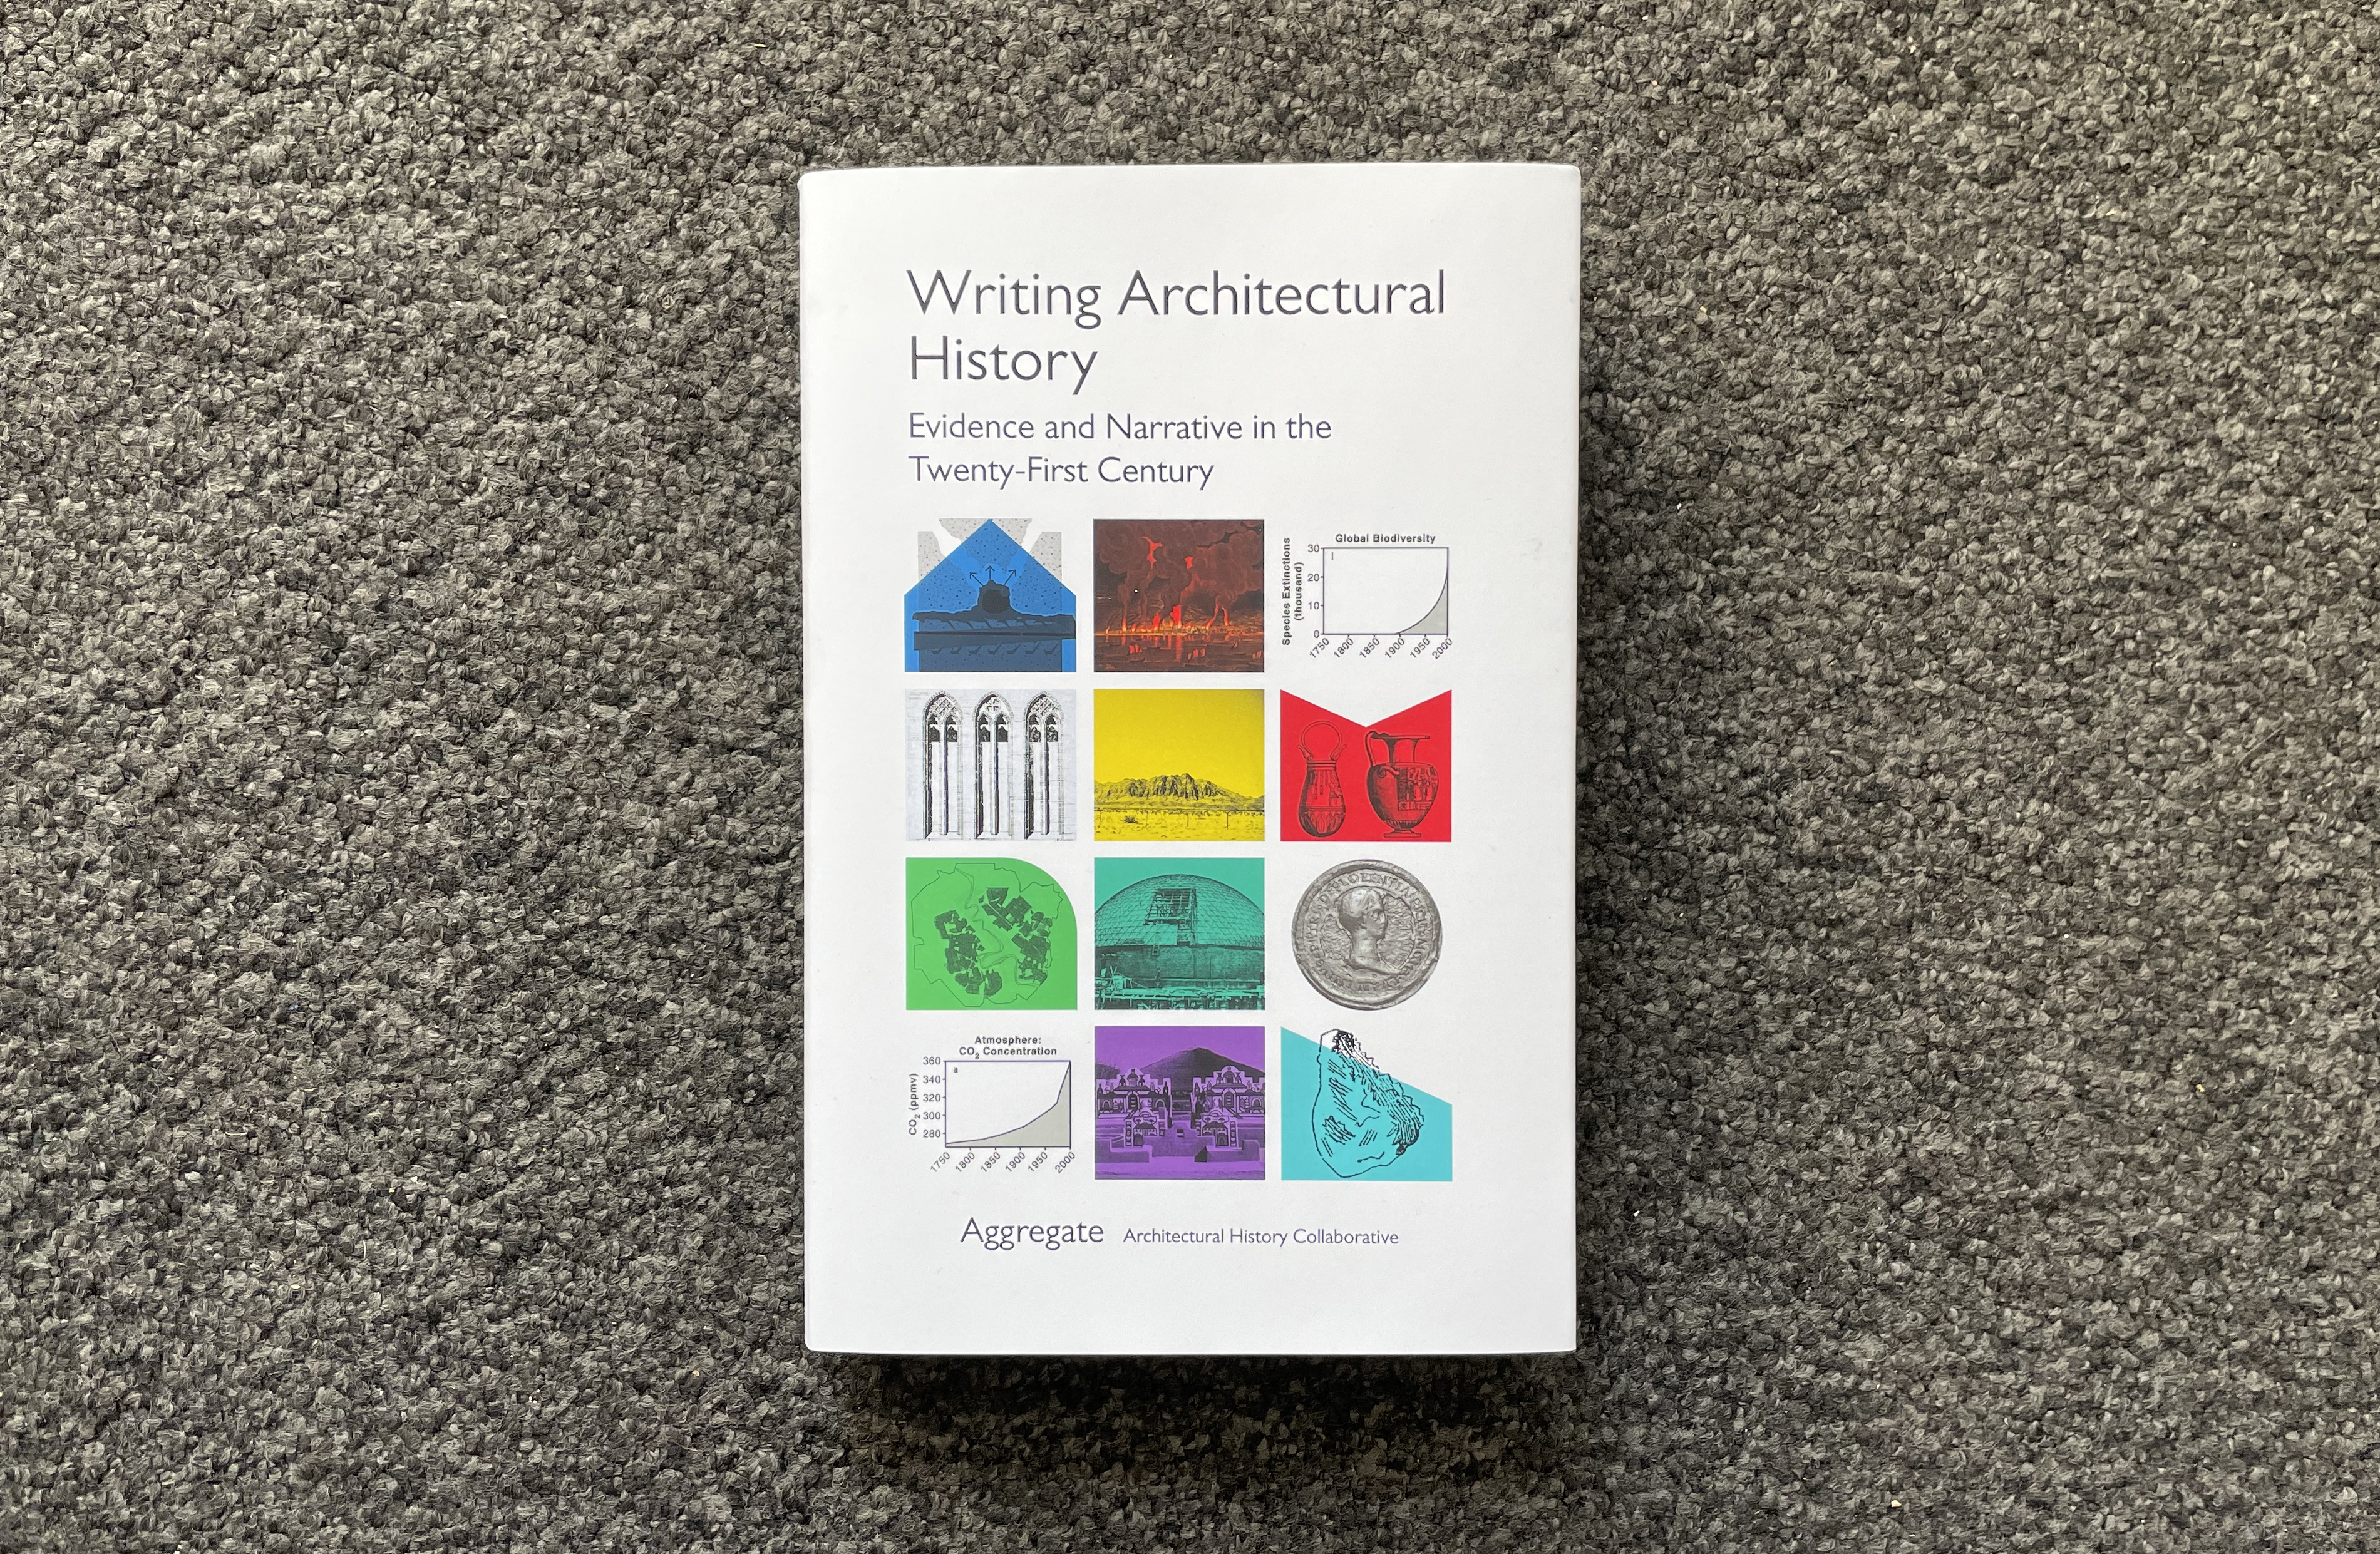 On a textured grey background, a white book with a brightly colored grid of varying illustrations reads: "Writing Architectural History: Evidence and Narrative in the Twenty-First Century." The book is edited by the Aggregate Architectural History Collaborative.